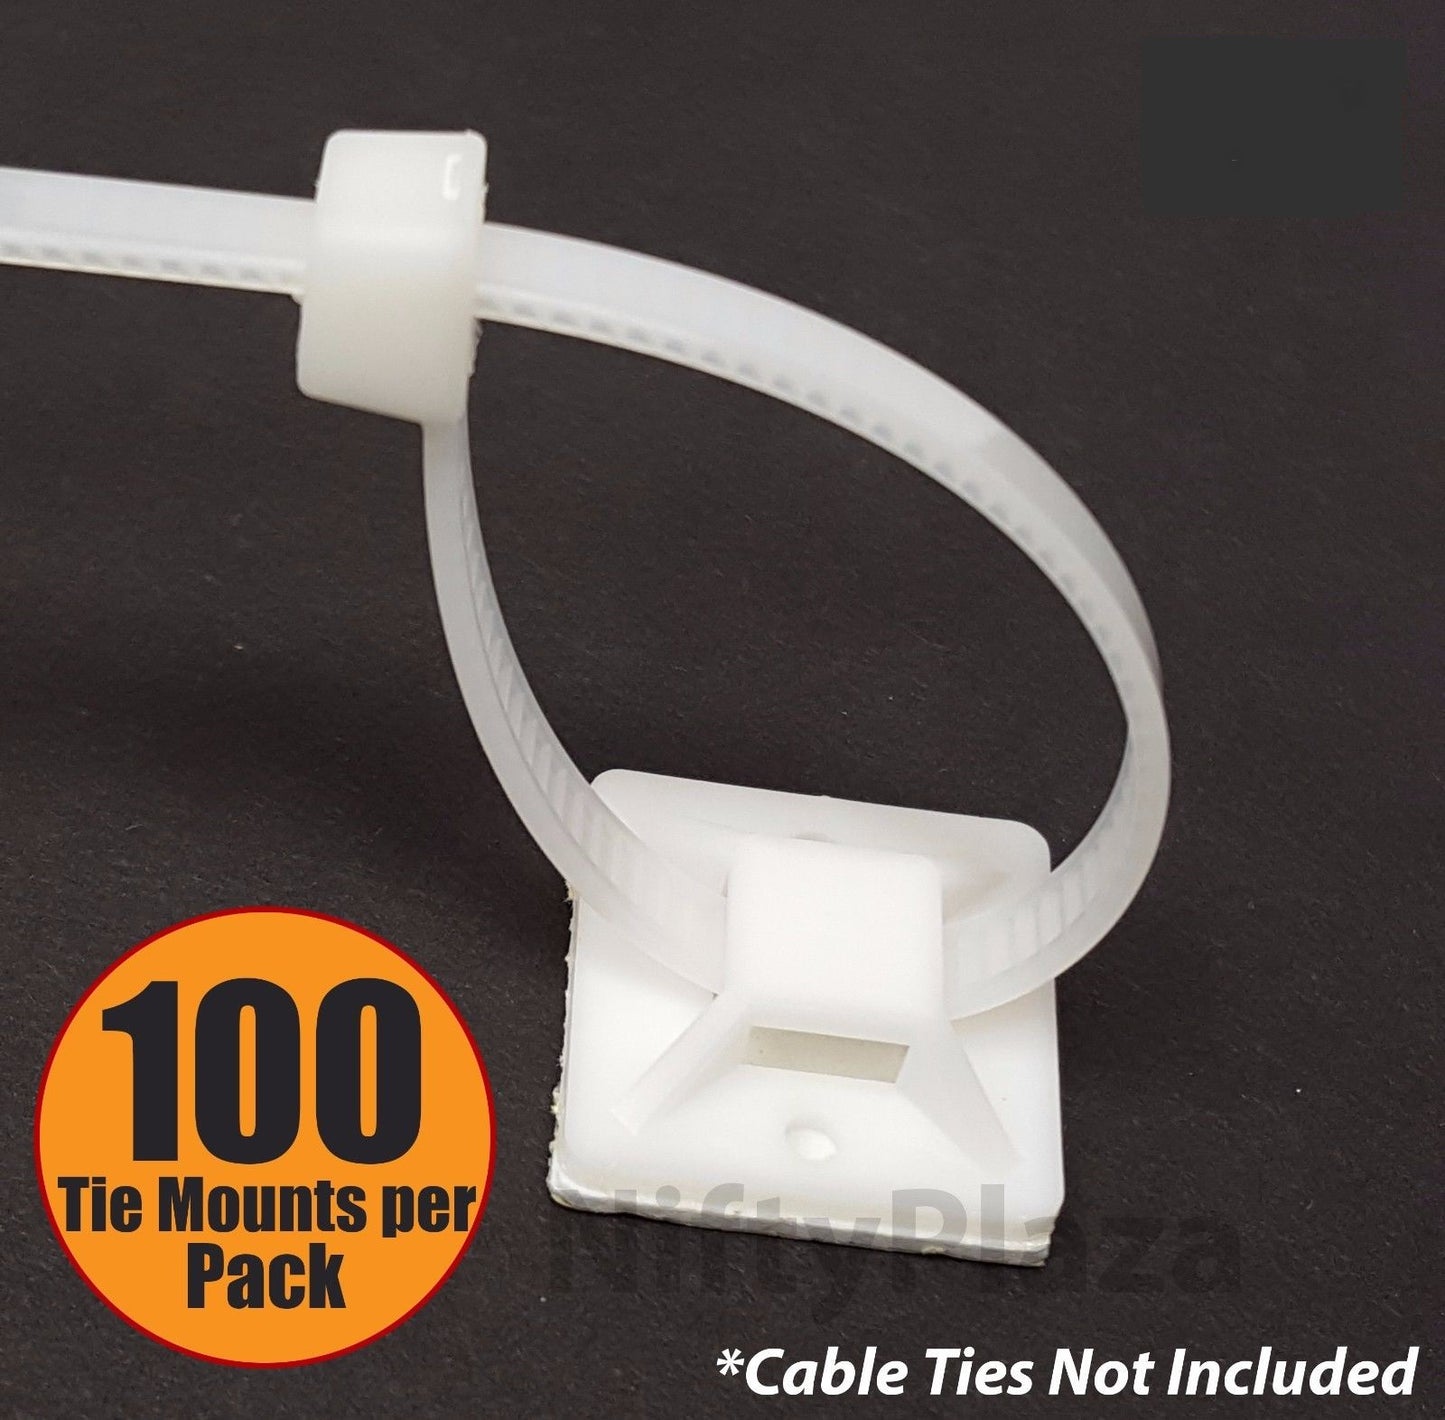 Cable Tie Mounts (25mm x 25mm) Self ADHESIVE Clips Wire Tie Base - Premium Grade Strength Screw-Hole Anchor Point Provides Optimal Strength